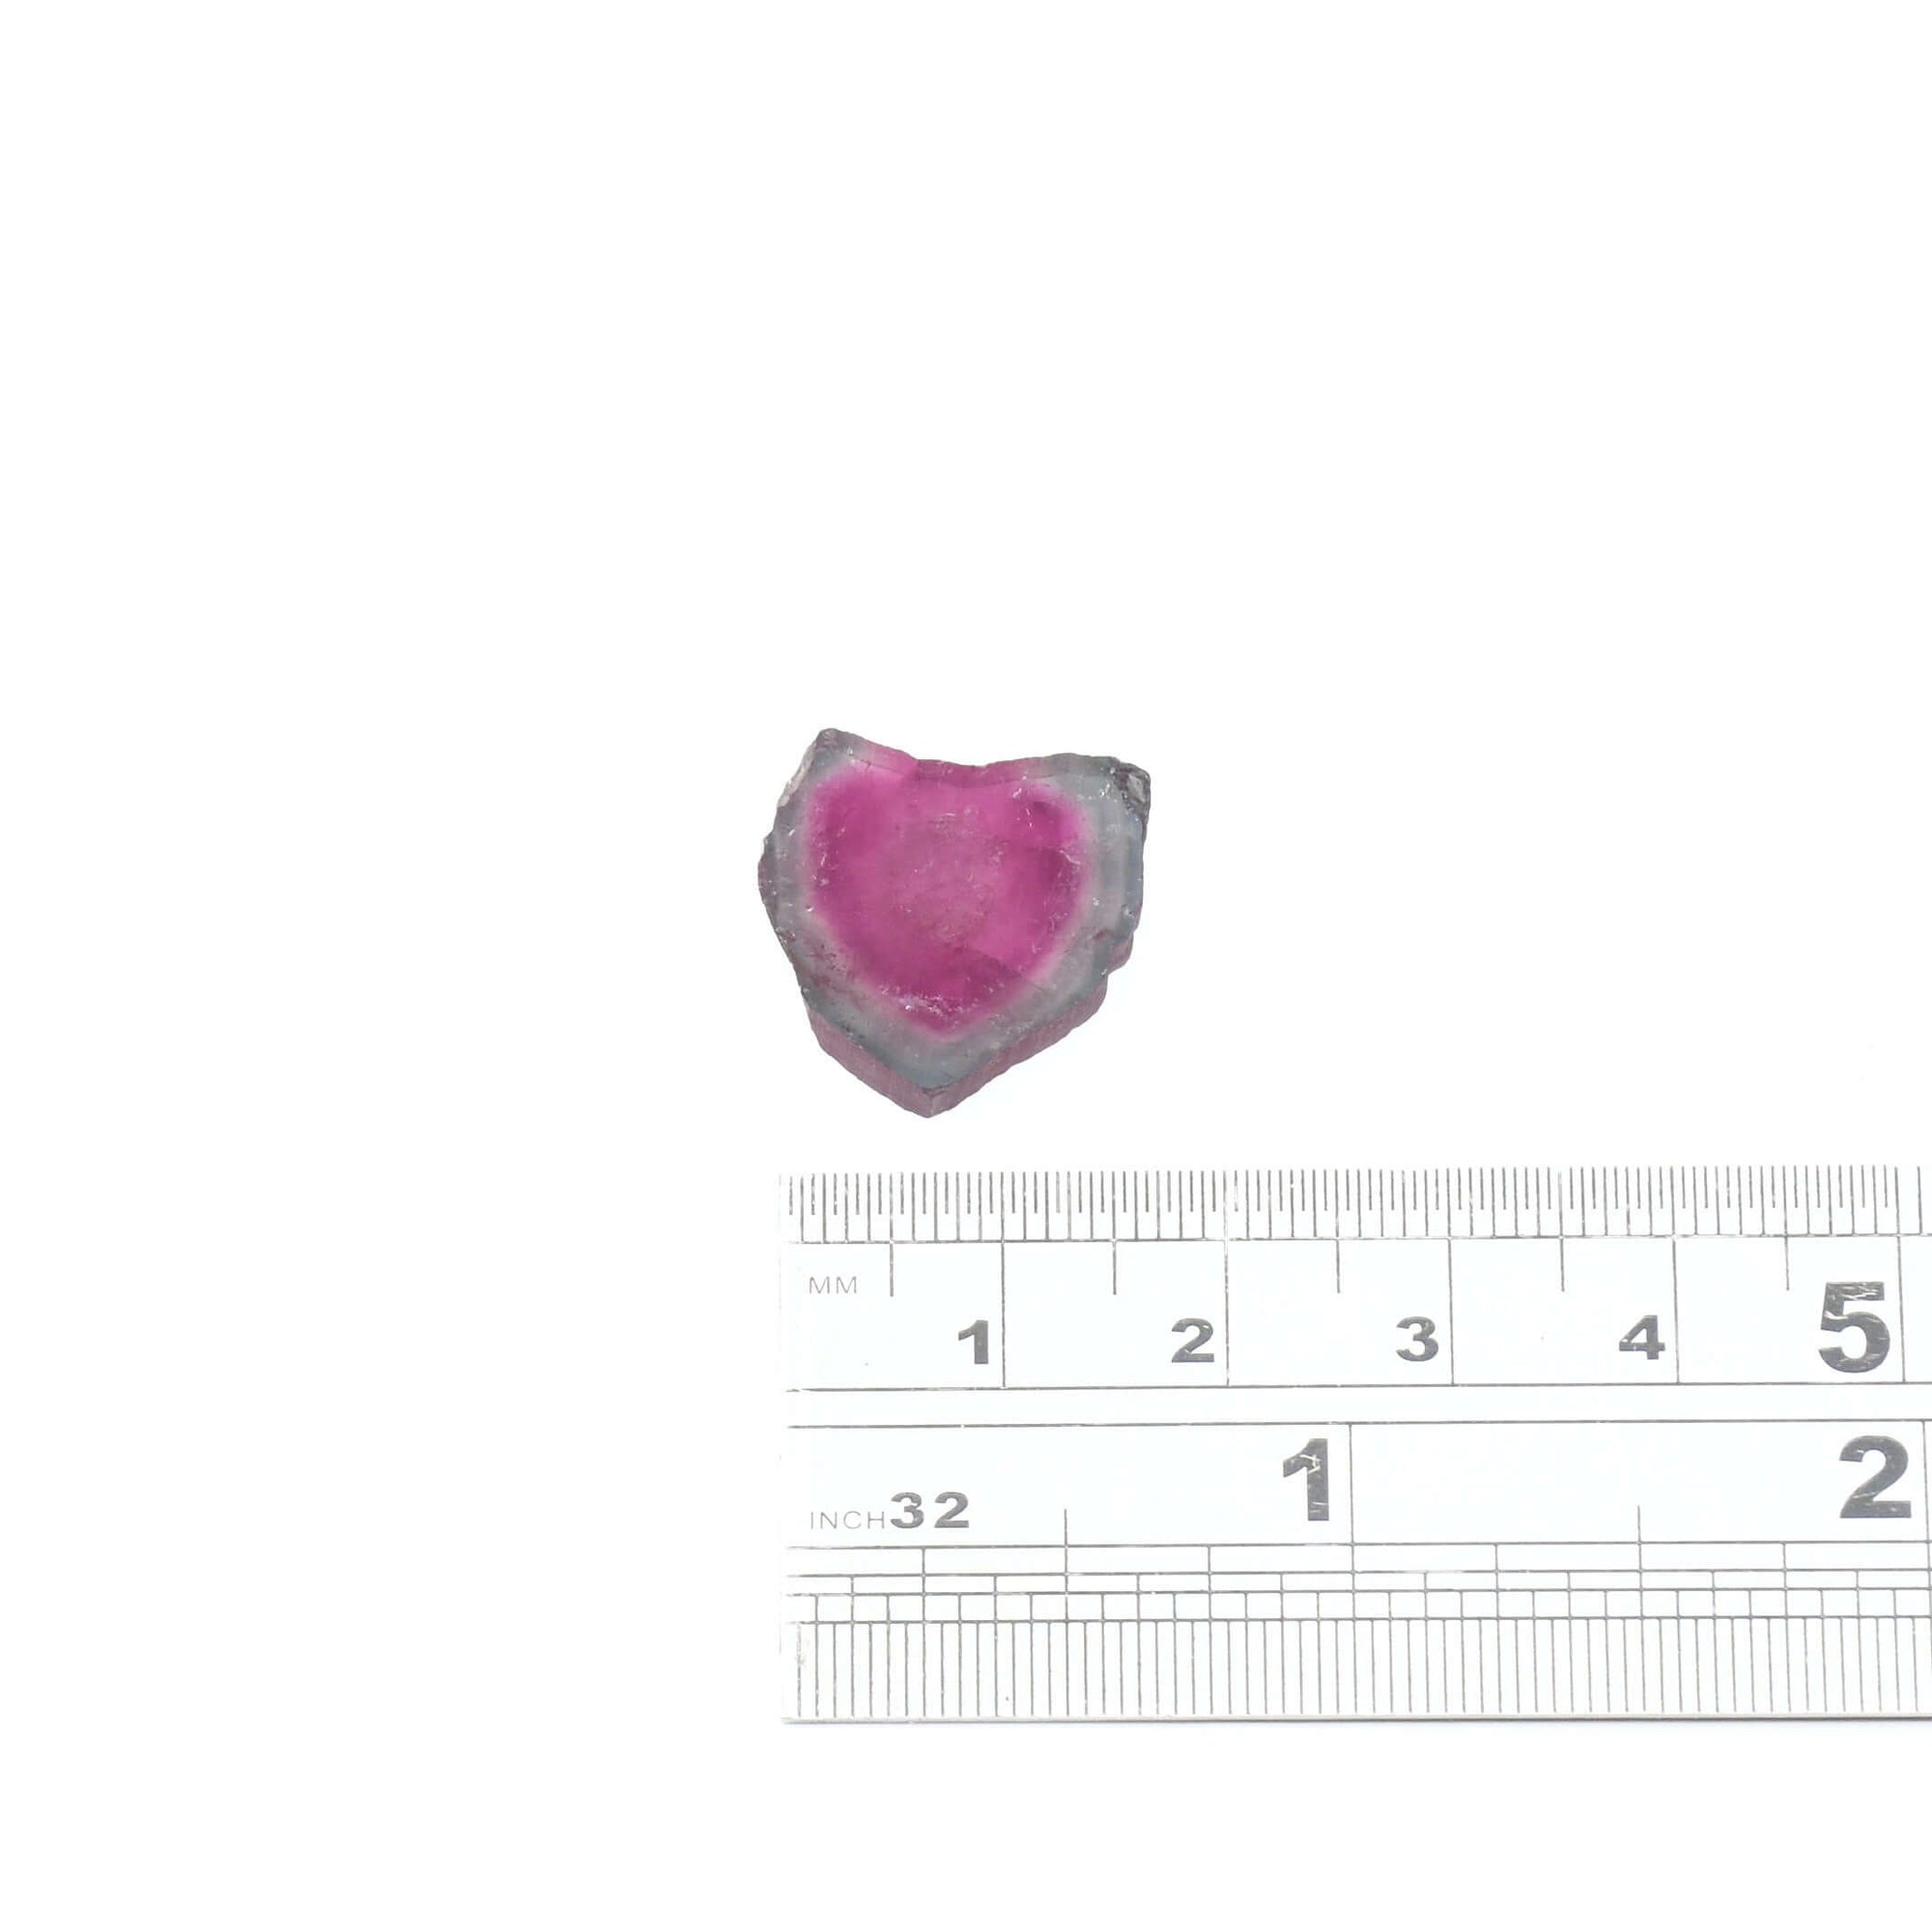 This 11.29ct genuine watermelon tourmaline slice features a large dark pink center and pale blue edge 